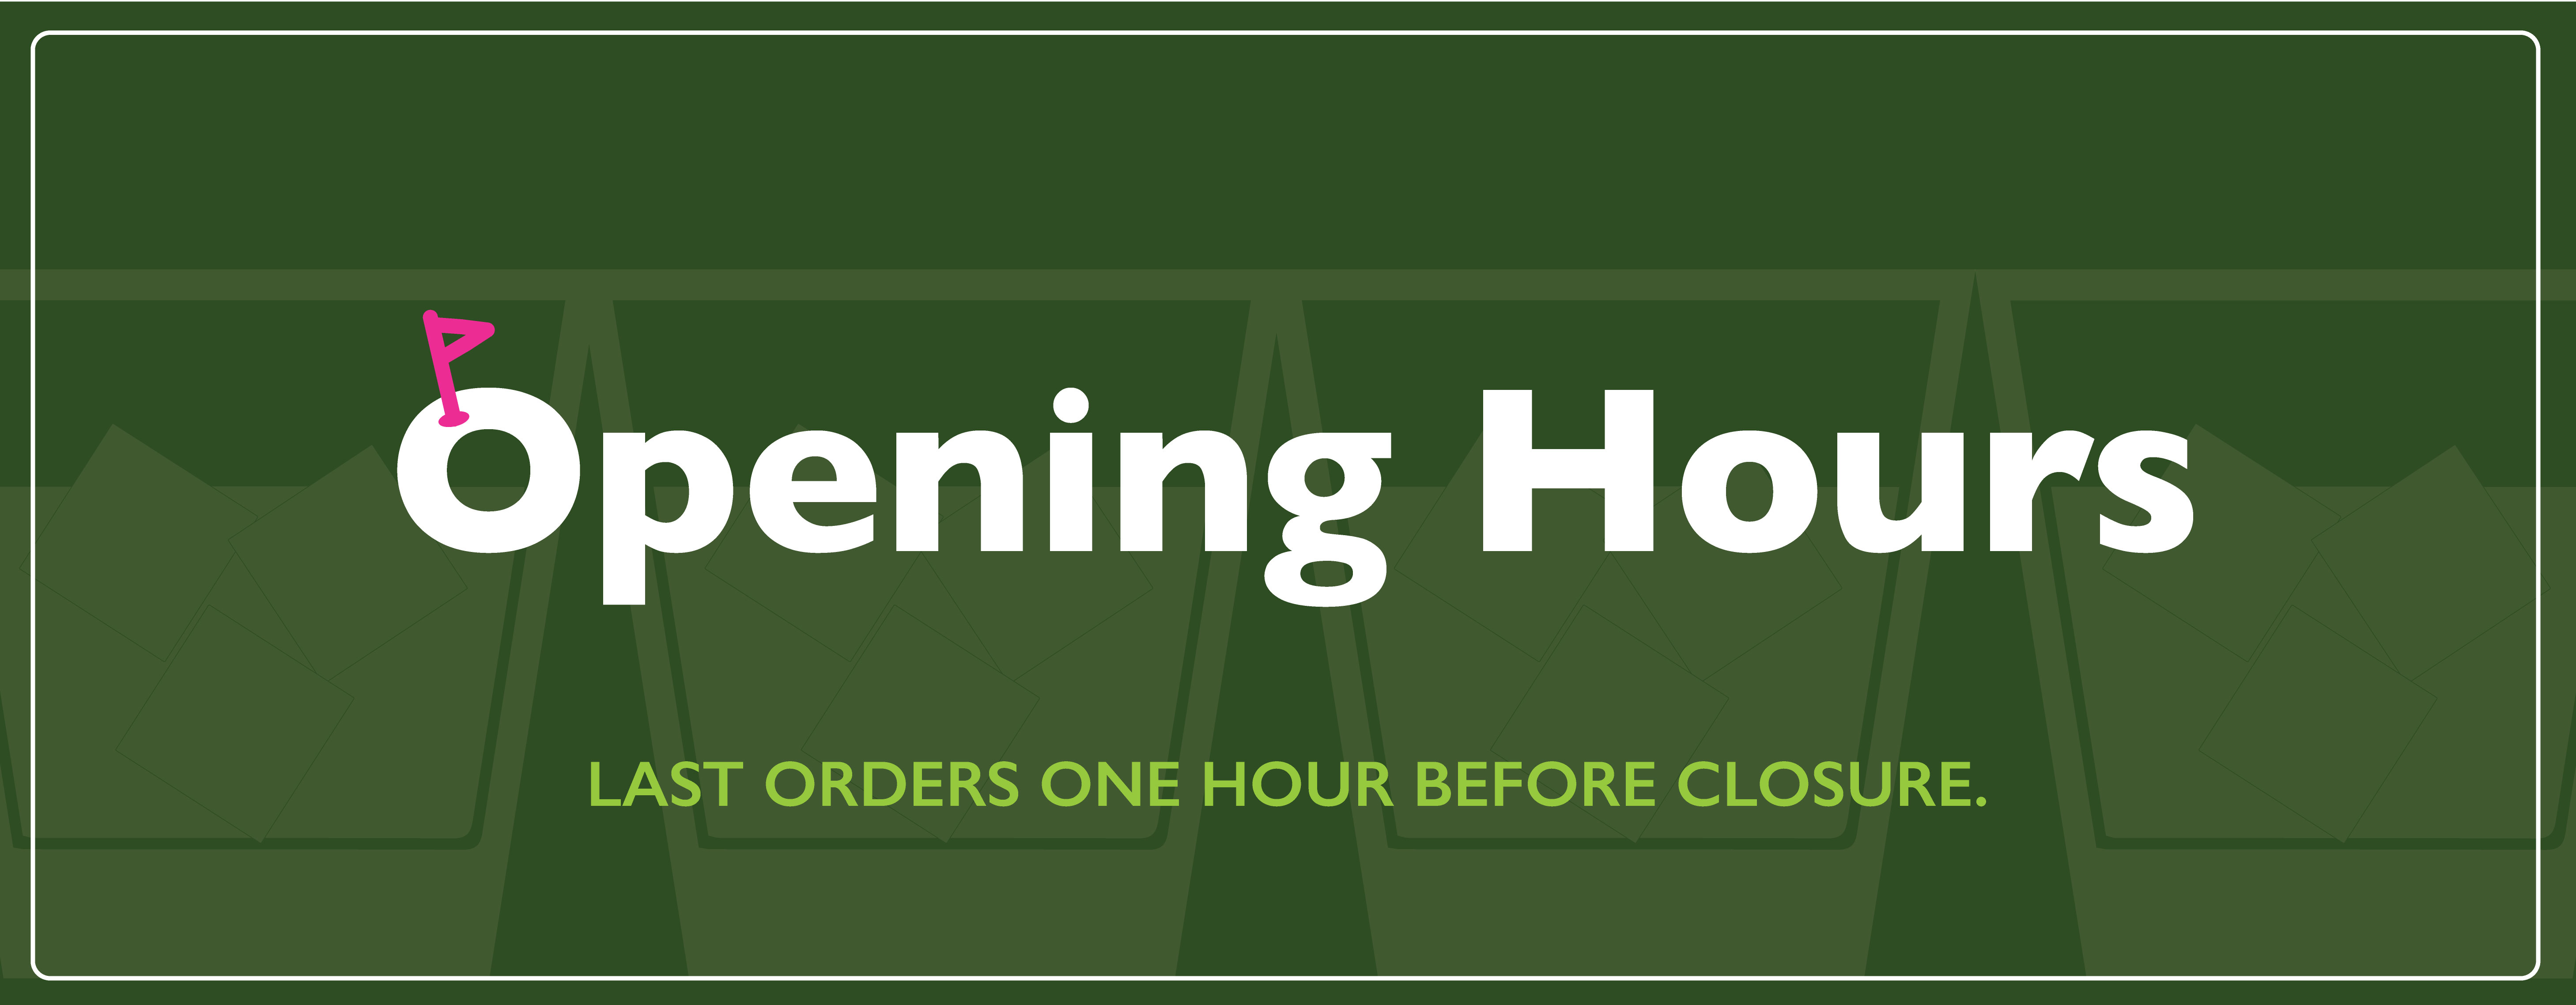 Opening hours banner 